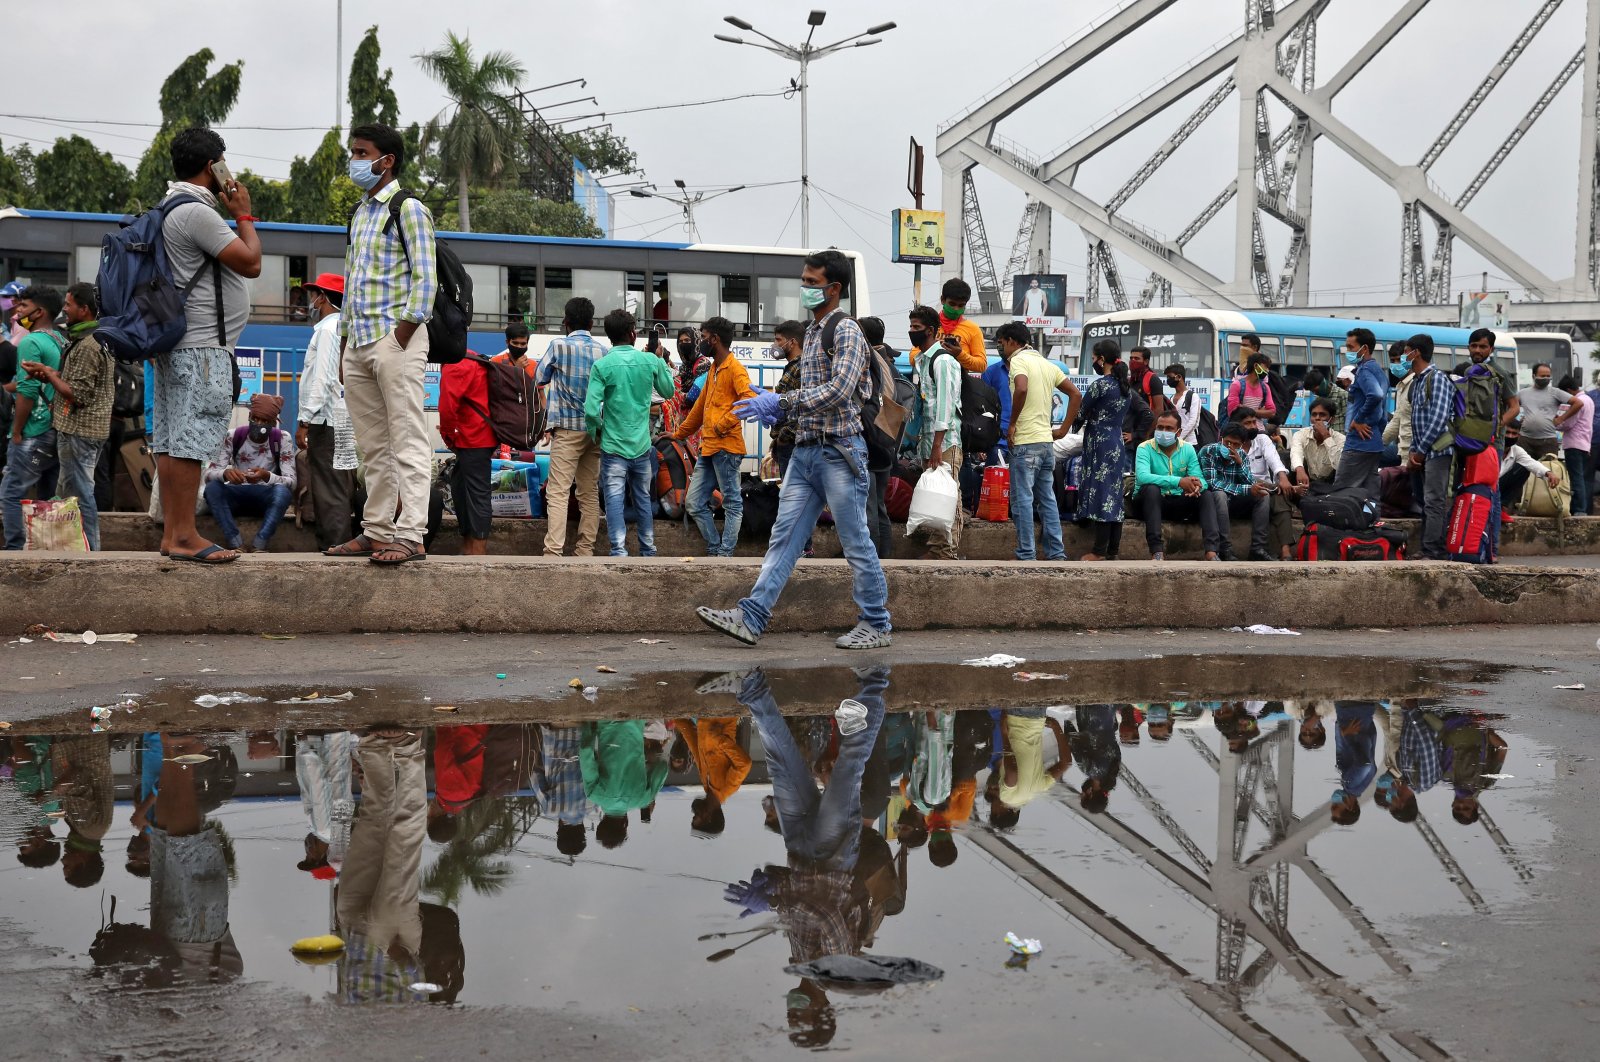 Migrant workers wait for transport outside the Howrah railway station after authorities announced a lockdown for two days every week in the West Bengal state, amid the spread of the coronavirus, in Kolkata, India, July 23, 2020. (Reuters Photo)